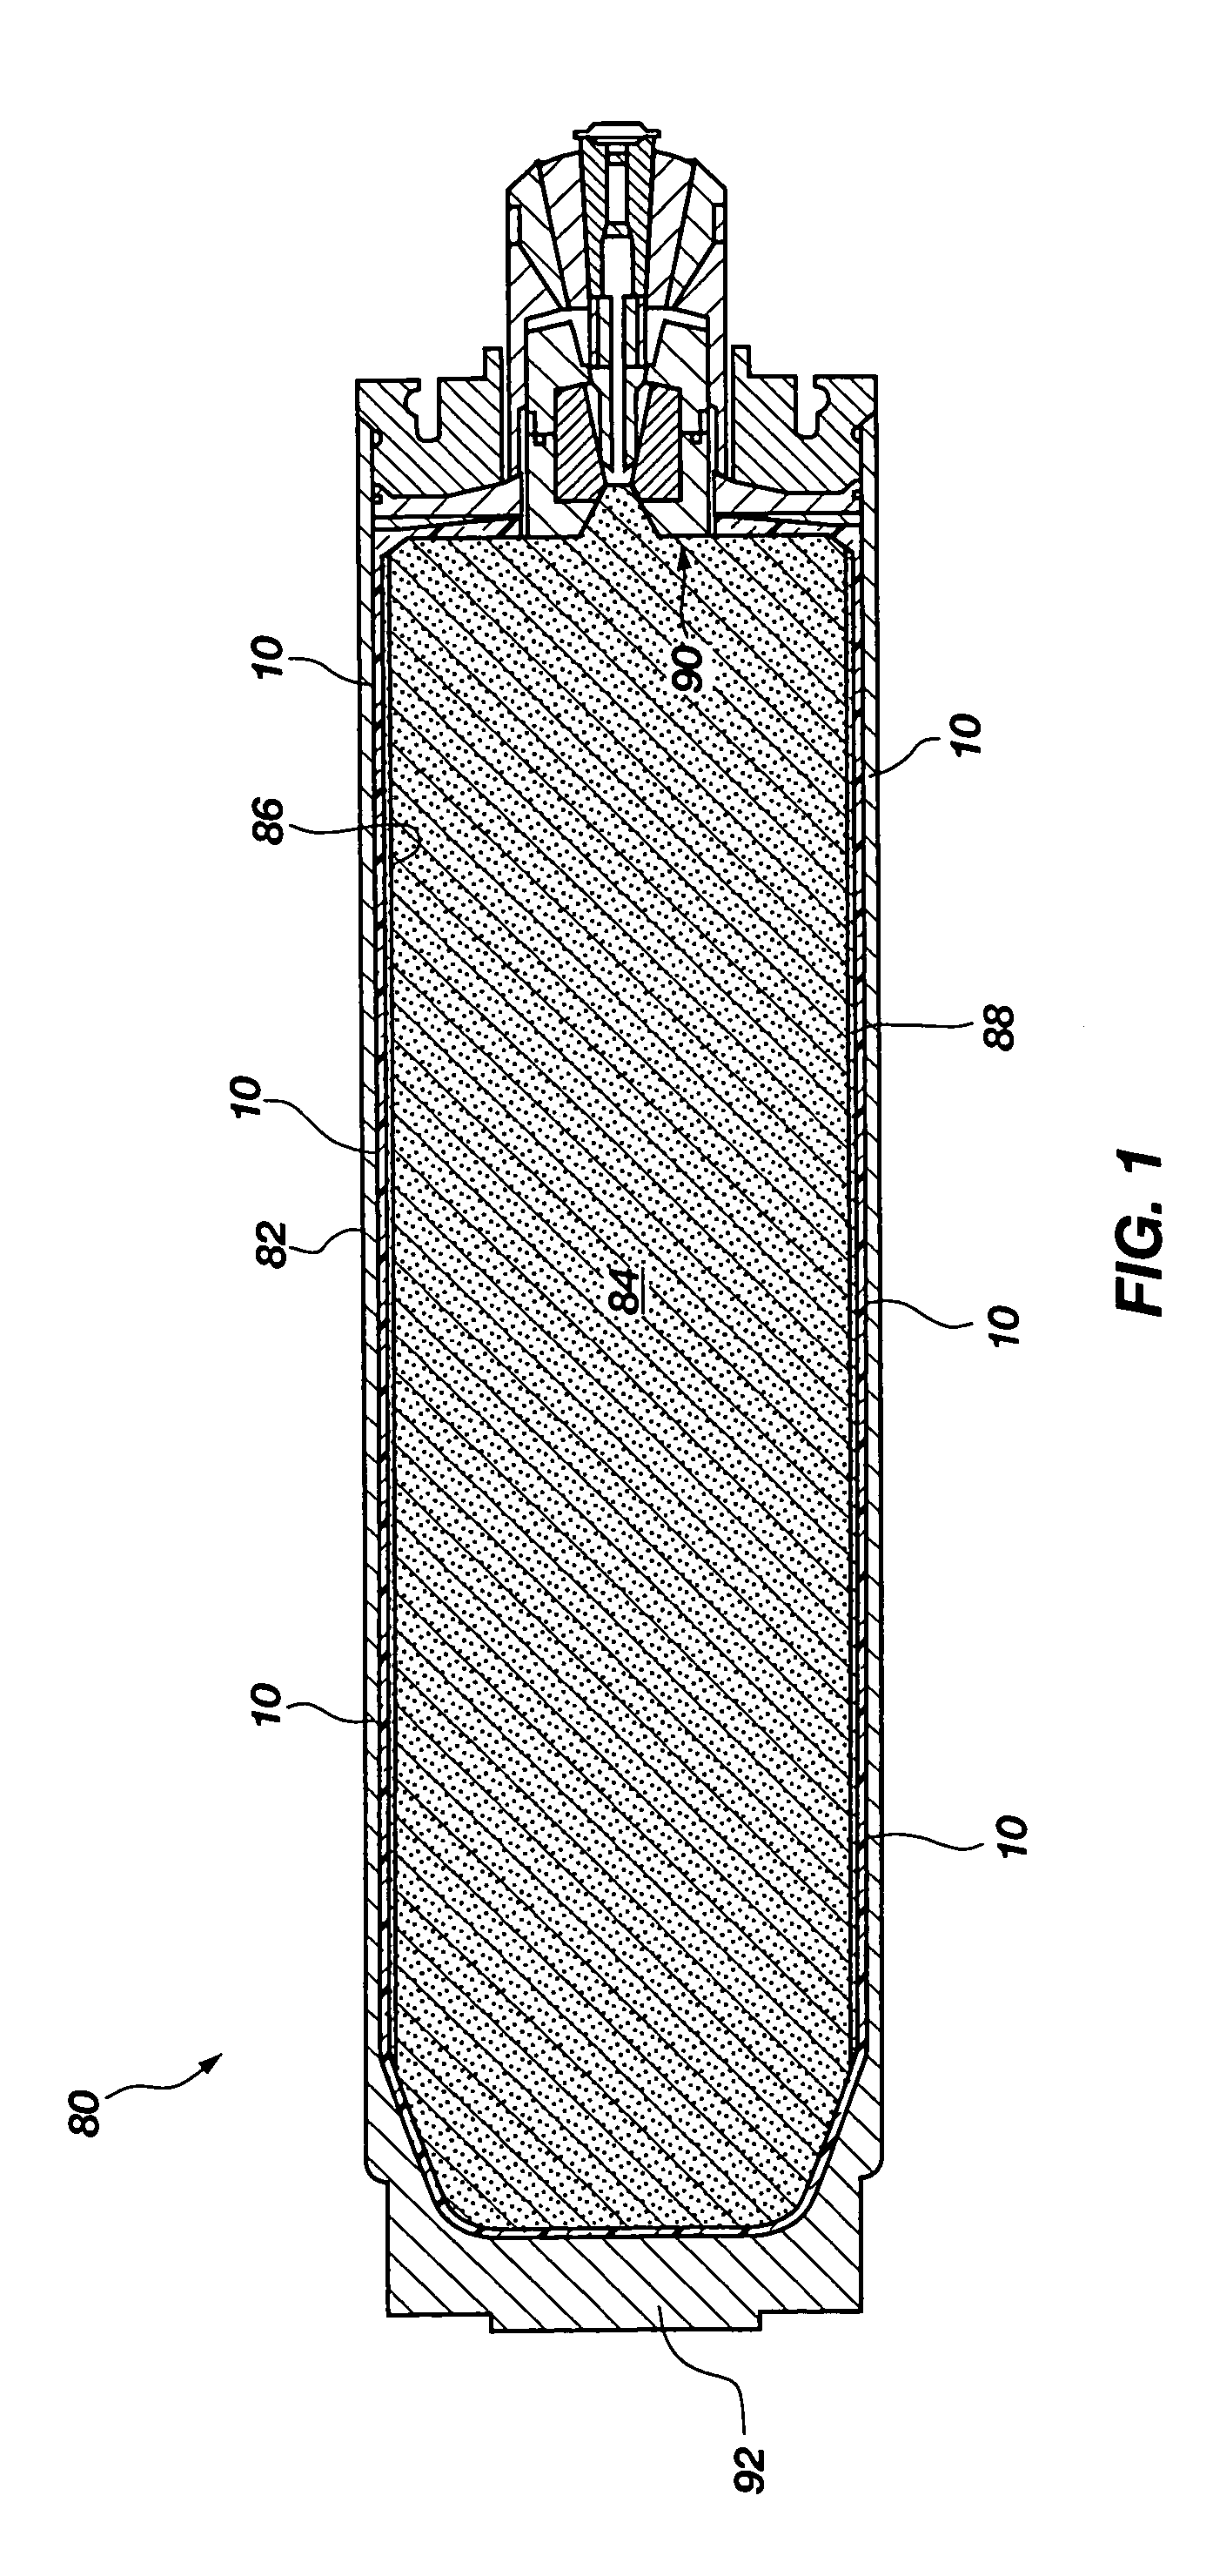 Apparatus and method for measuring stress at an interface